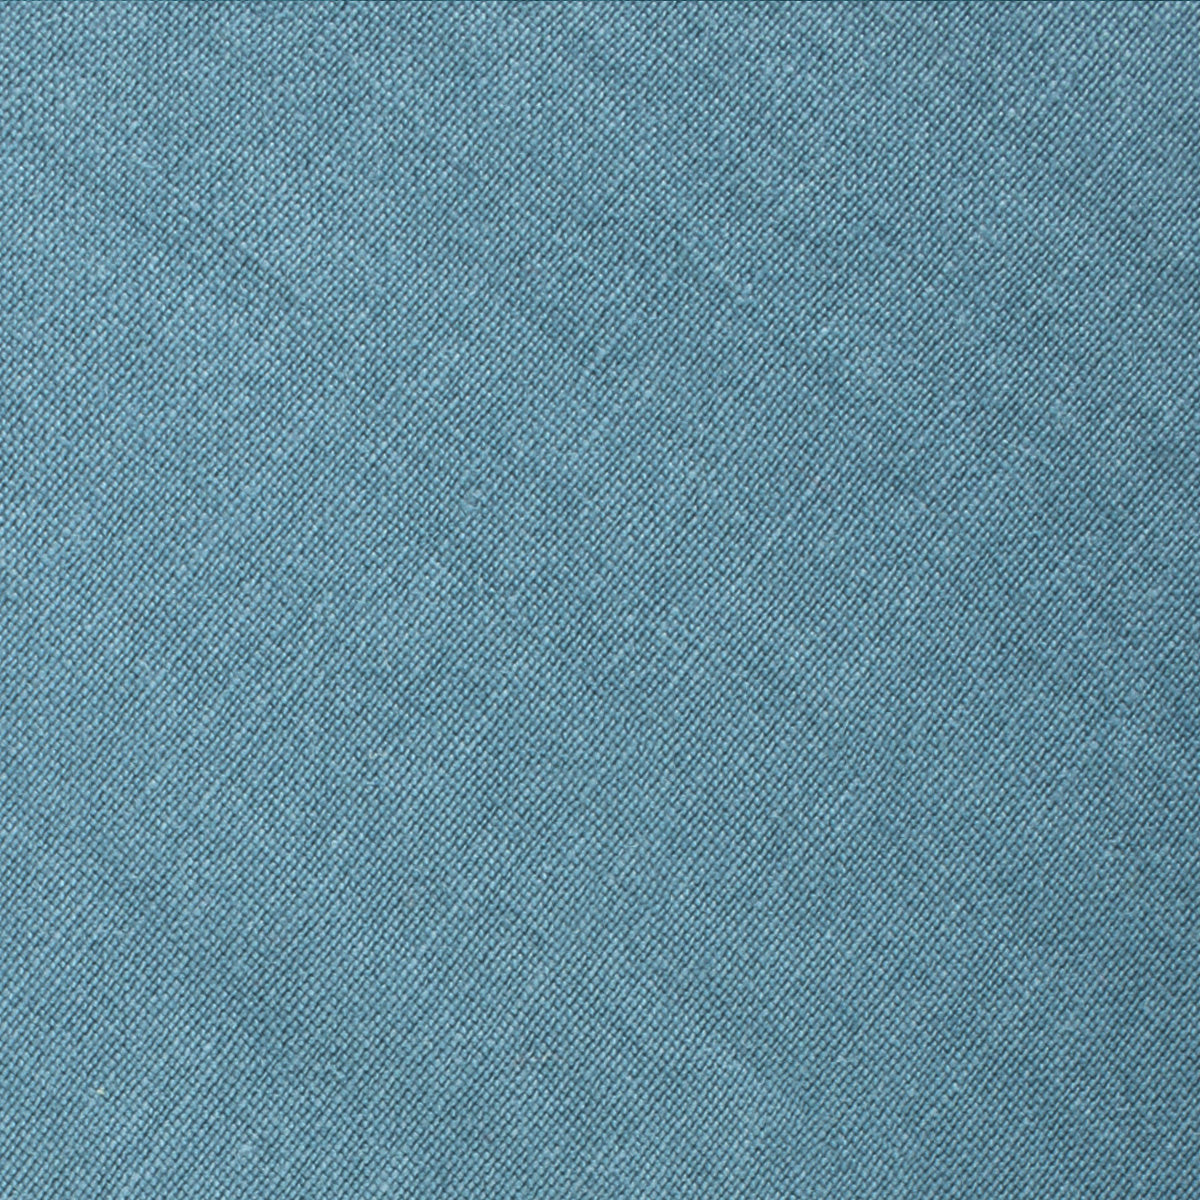 Dusty Teal Blue Linen Self Bow Tie Fabric